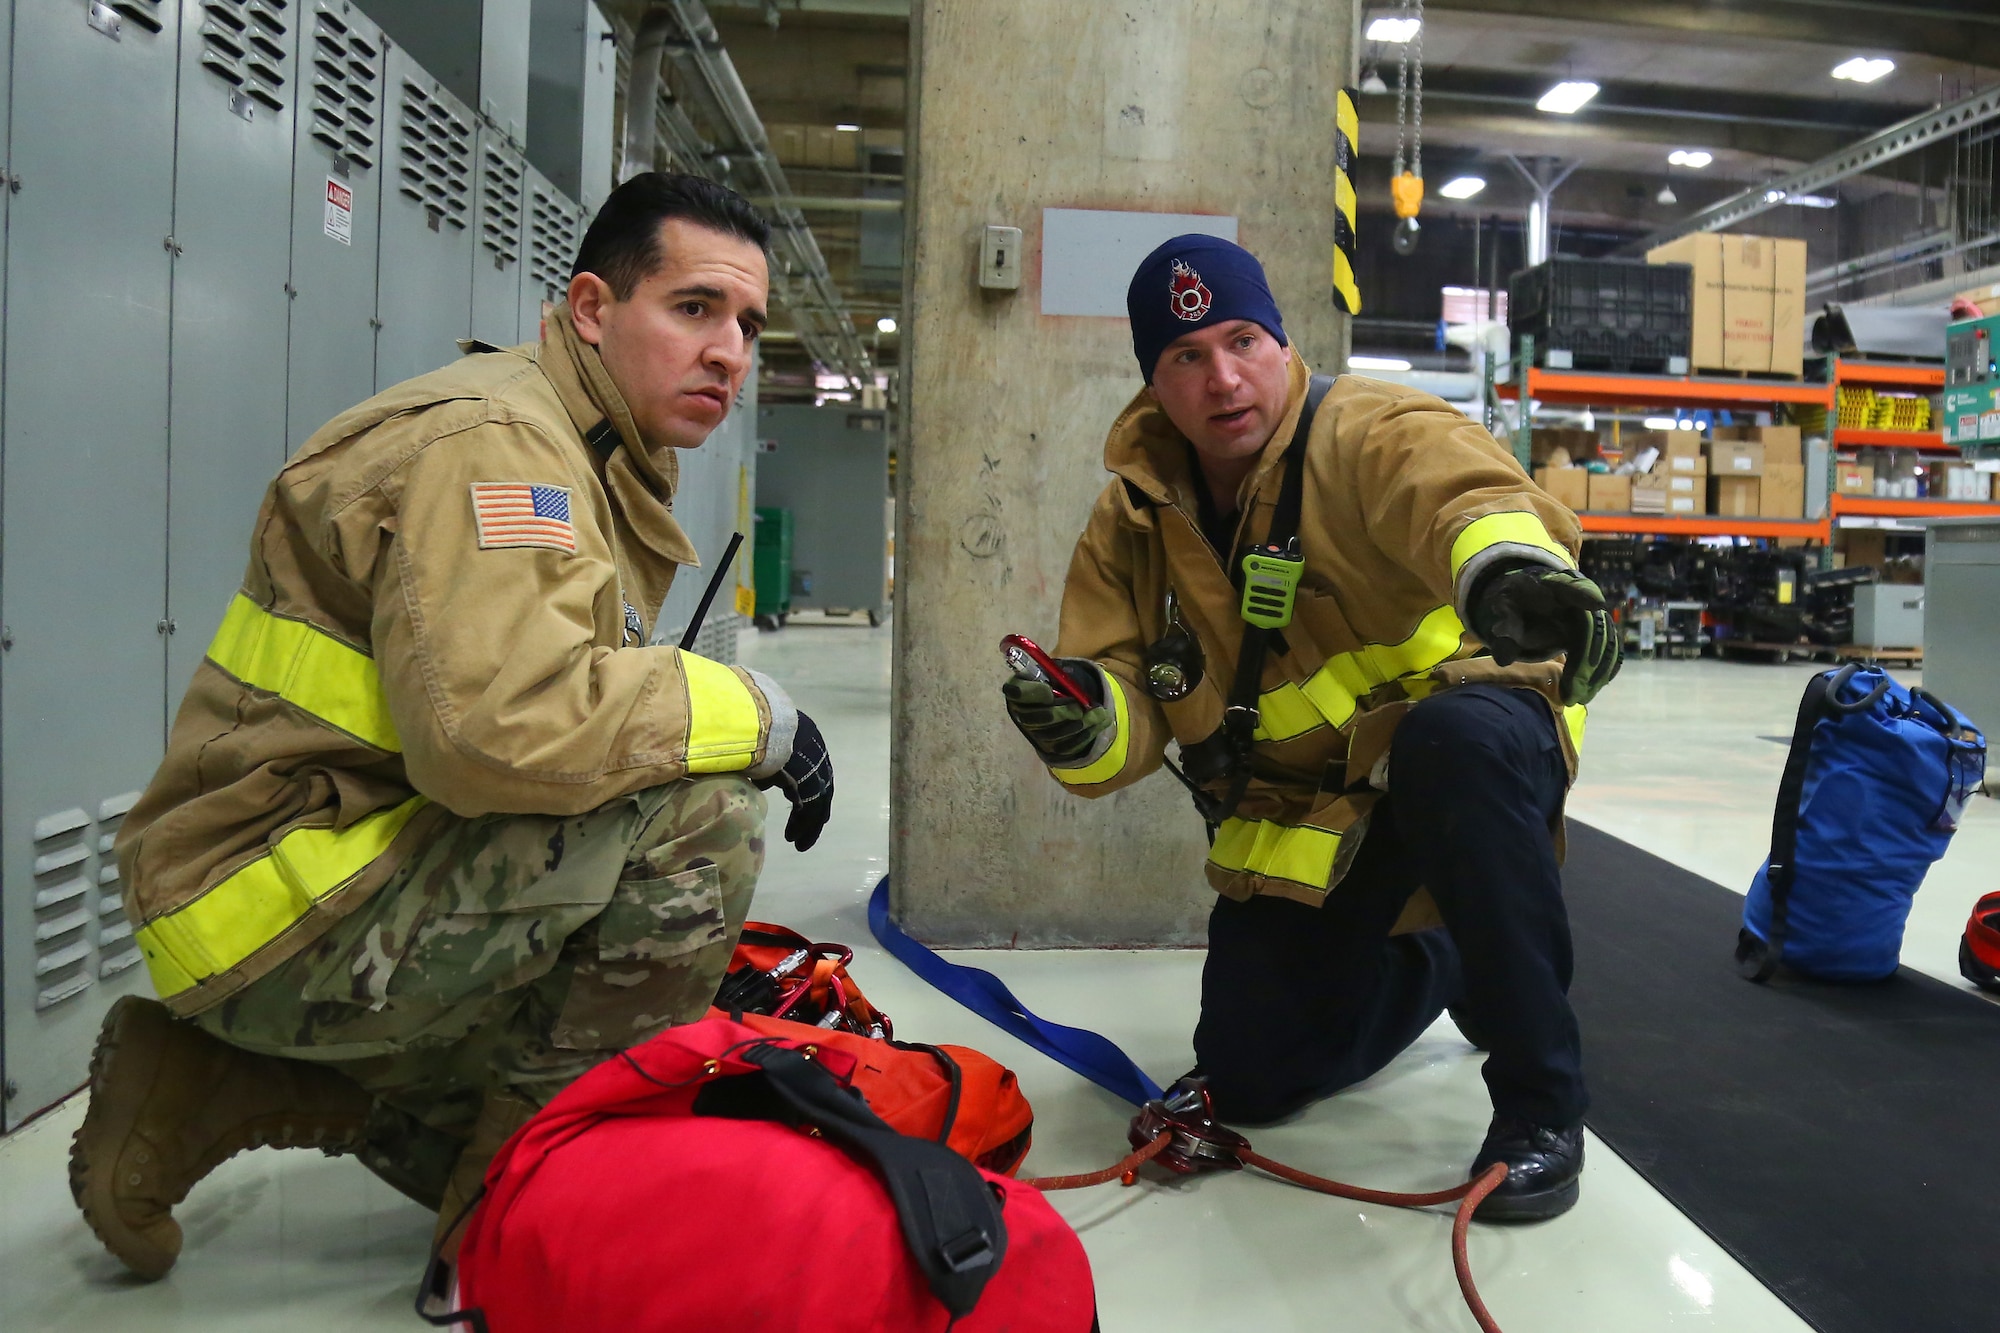 Firefighters anchor safety ropes for confined space rescue training at the Western Air Defense Sector Nov. 11, 2018, on Joint Base Lewis-McChord, Washington. Once the simulated patient was secured to a spinal board the firefighters used the ropes as a safety measure when lifting the patient out of the confined space. (U.S. Air National Guard photo by Master Sgt. Tim Chacon)